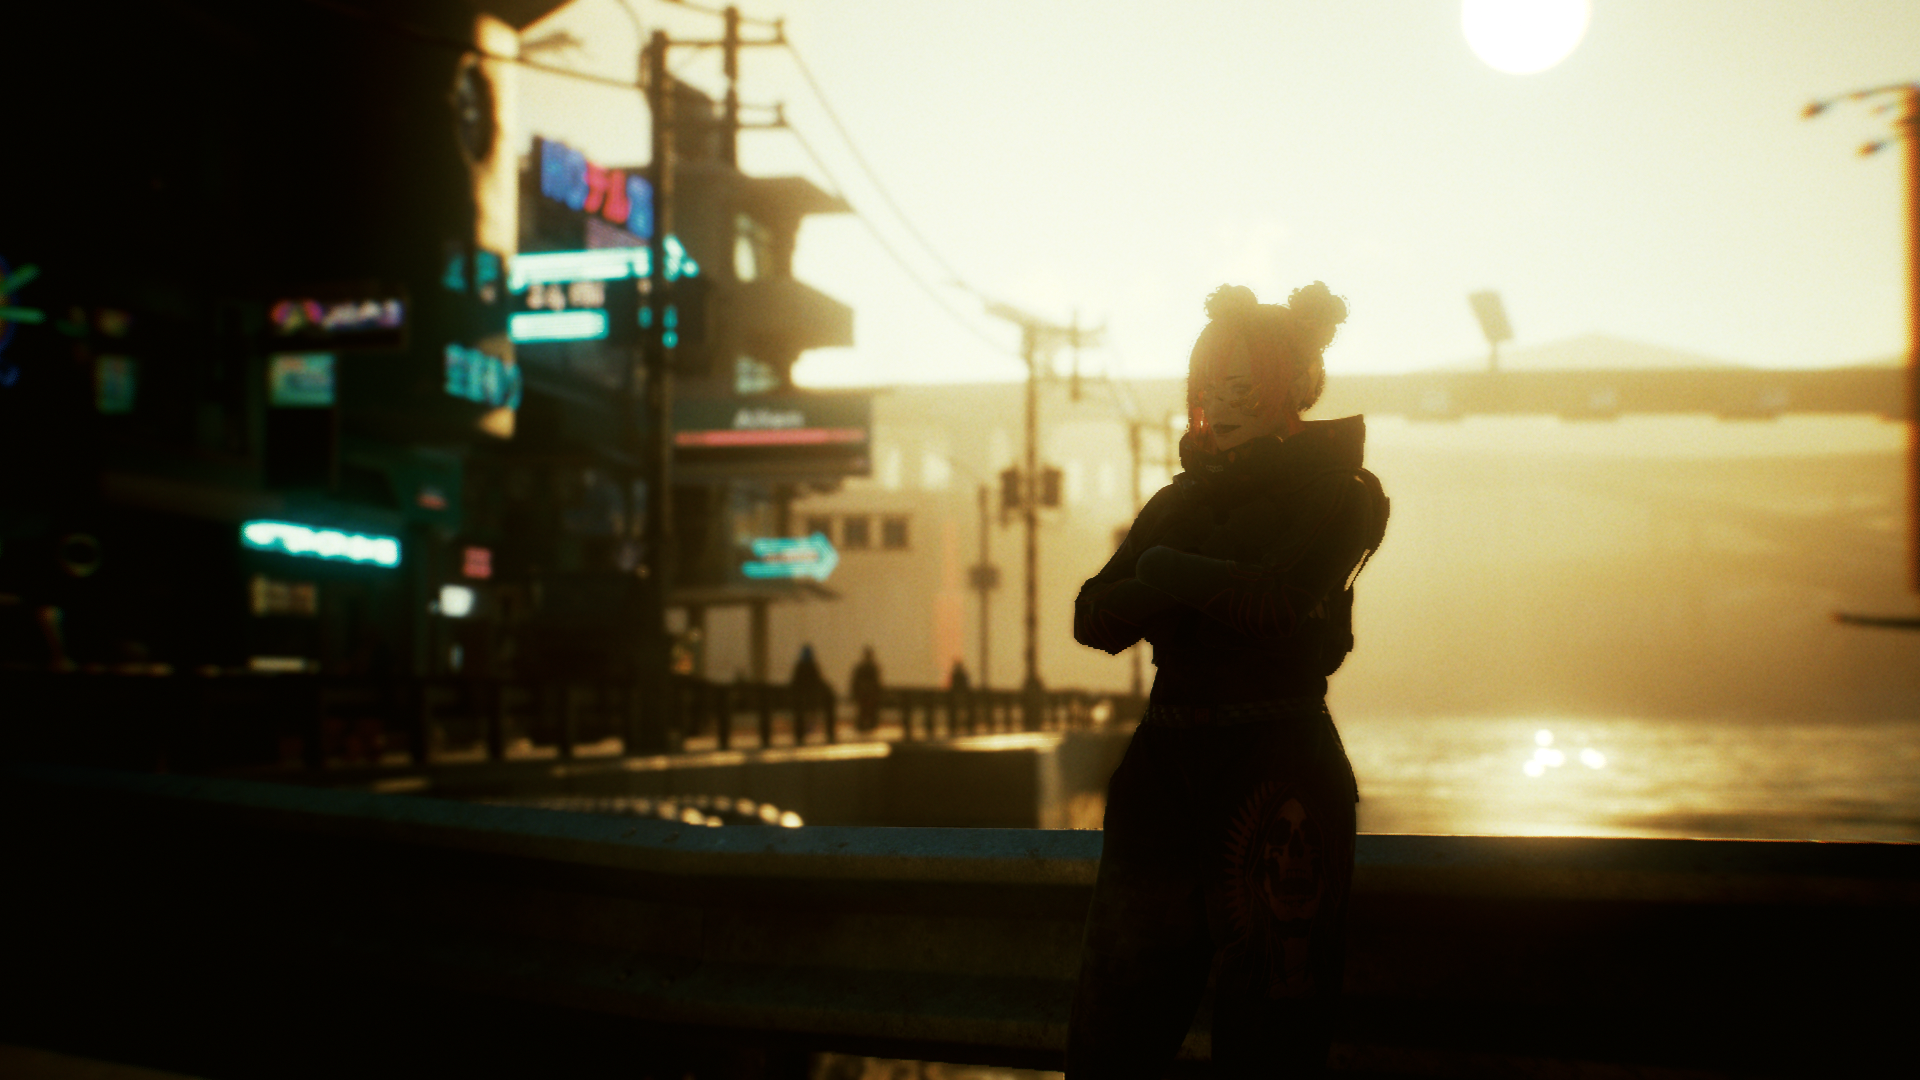 General 1920x1080 Cyberpunk 2077 portrait cityscape futuristic futuristic city cyberpunk CD Projekt RED video games video game characters